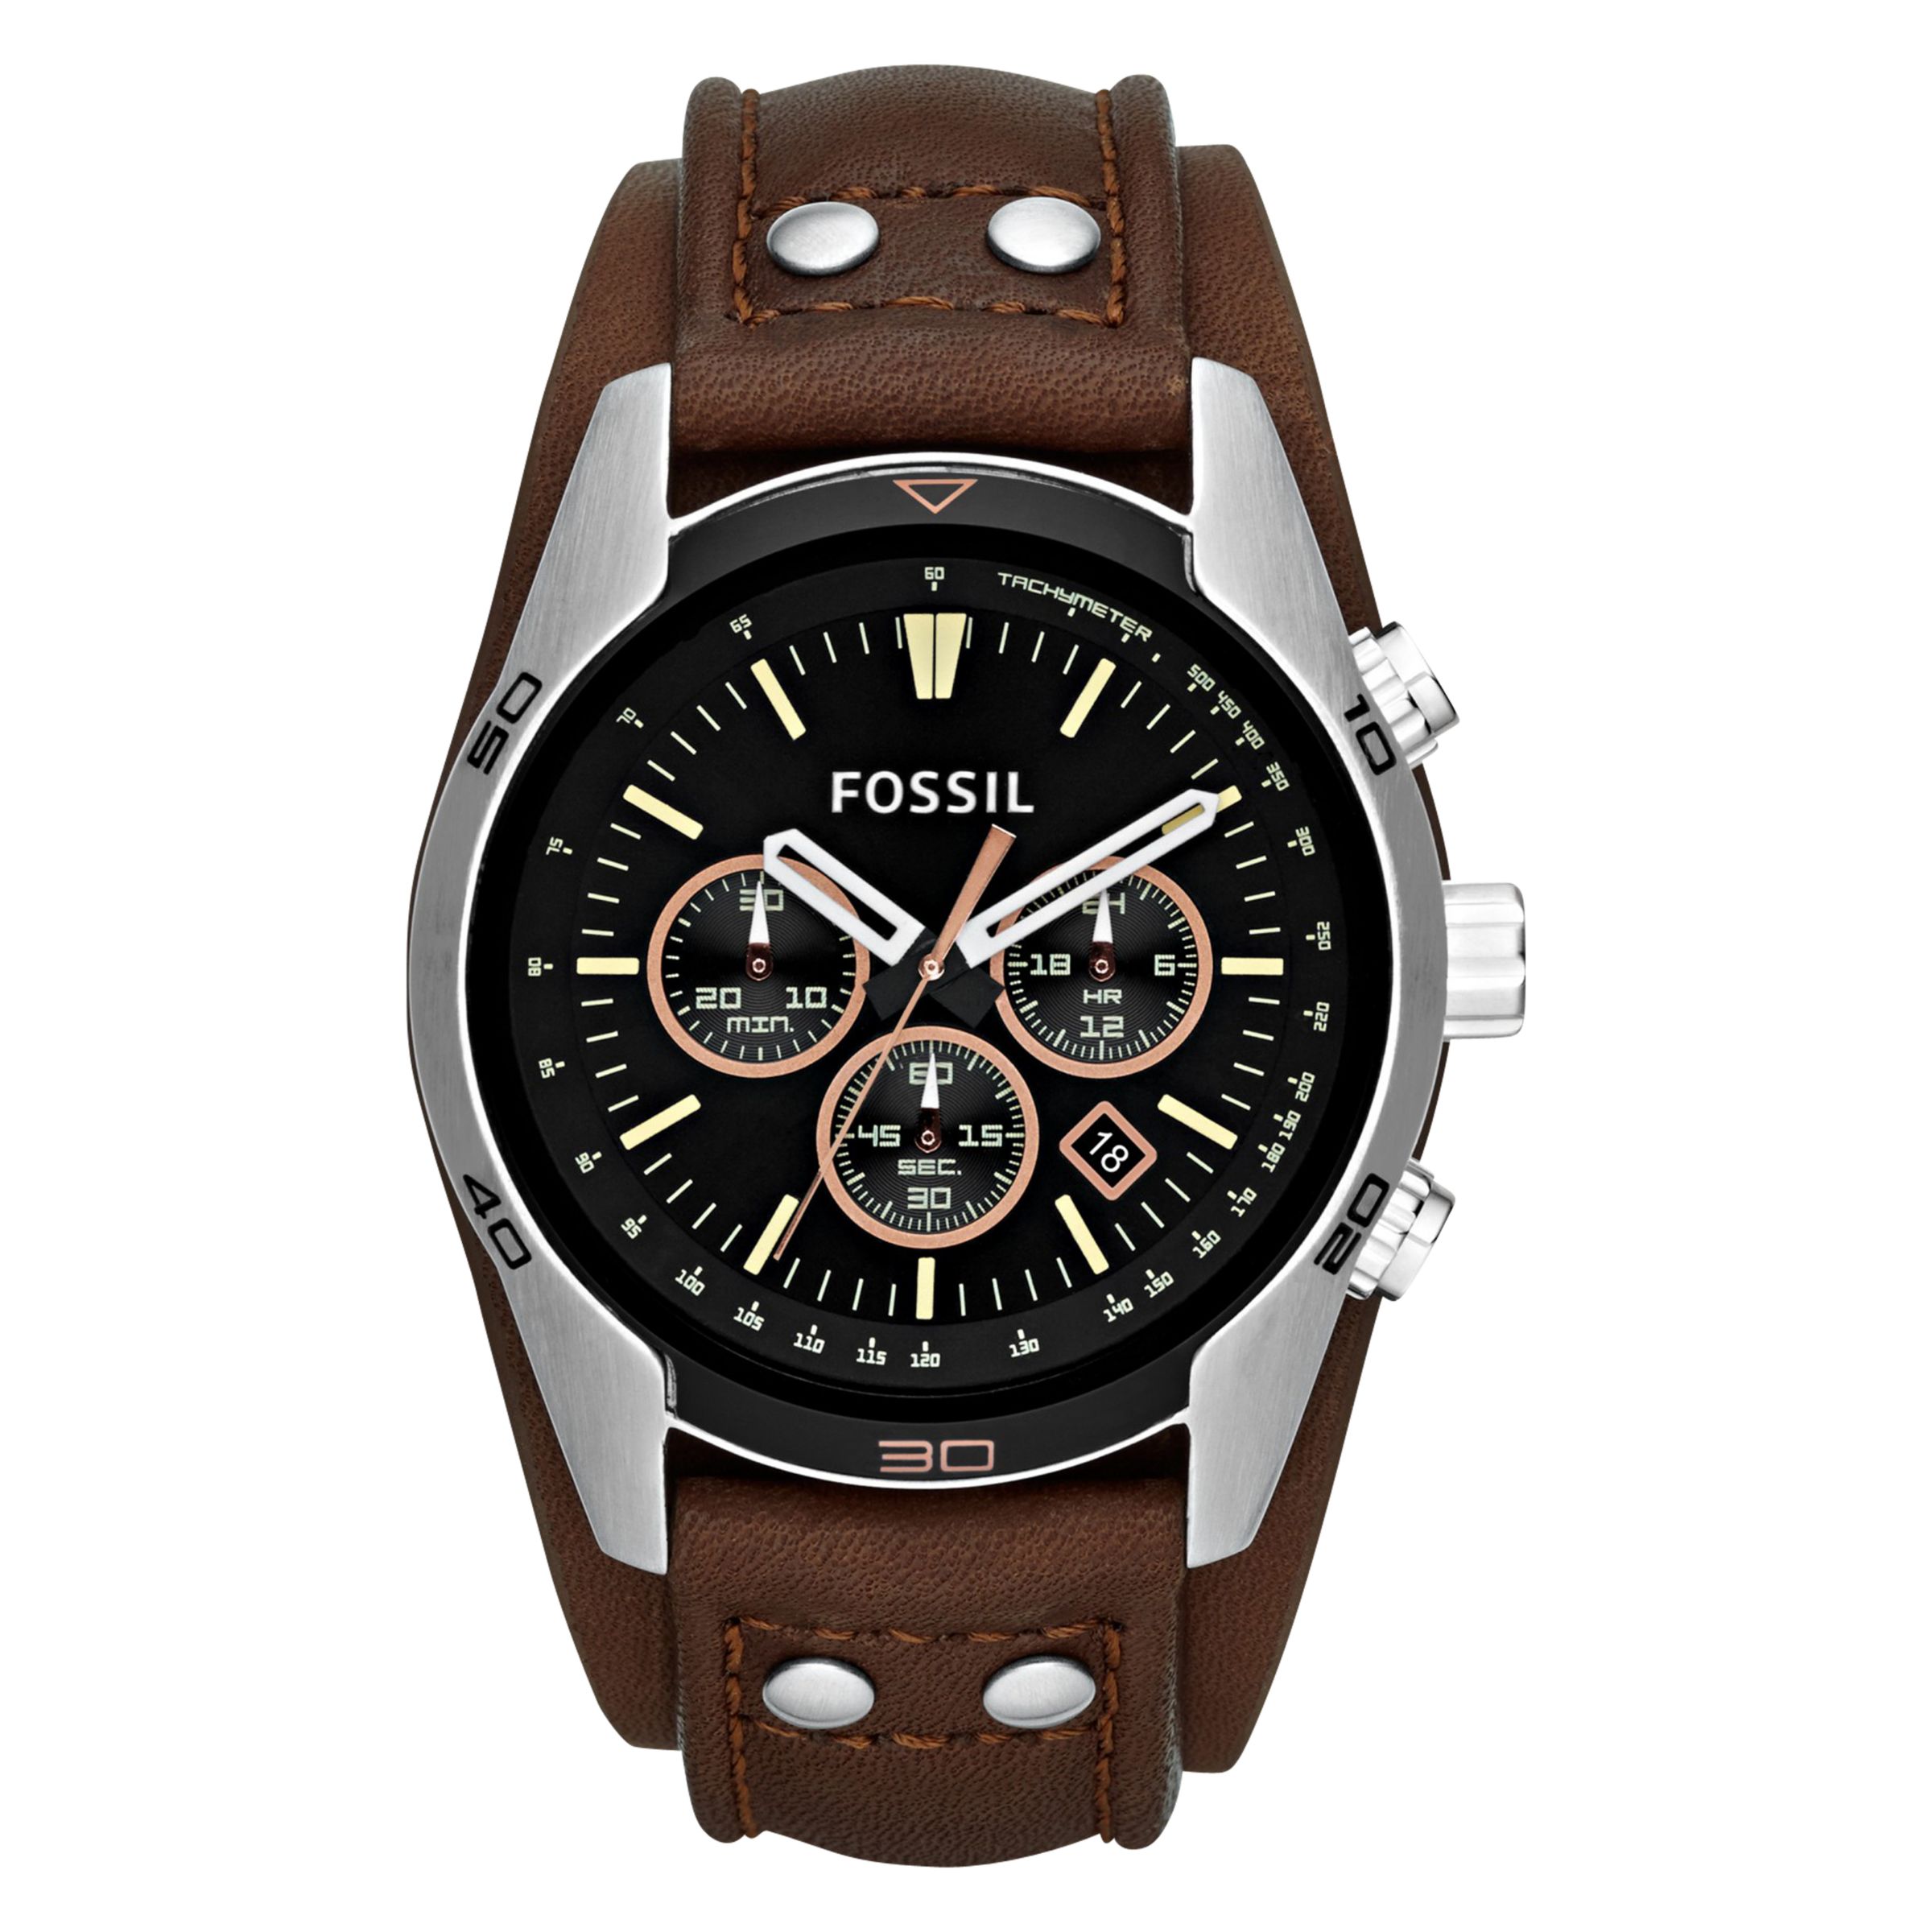 Fossil CH2891 Men's Coachman Chronograph Leather Strap Watch, Brown/Black